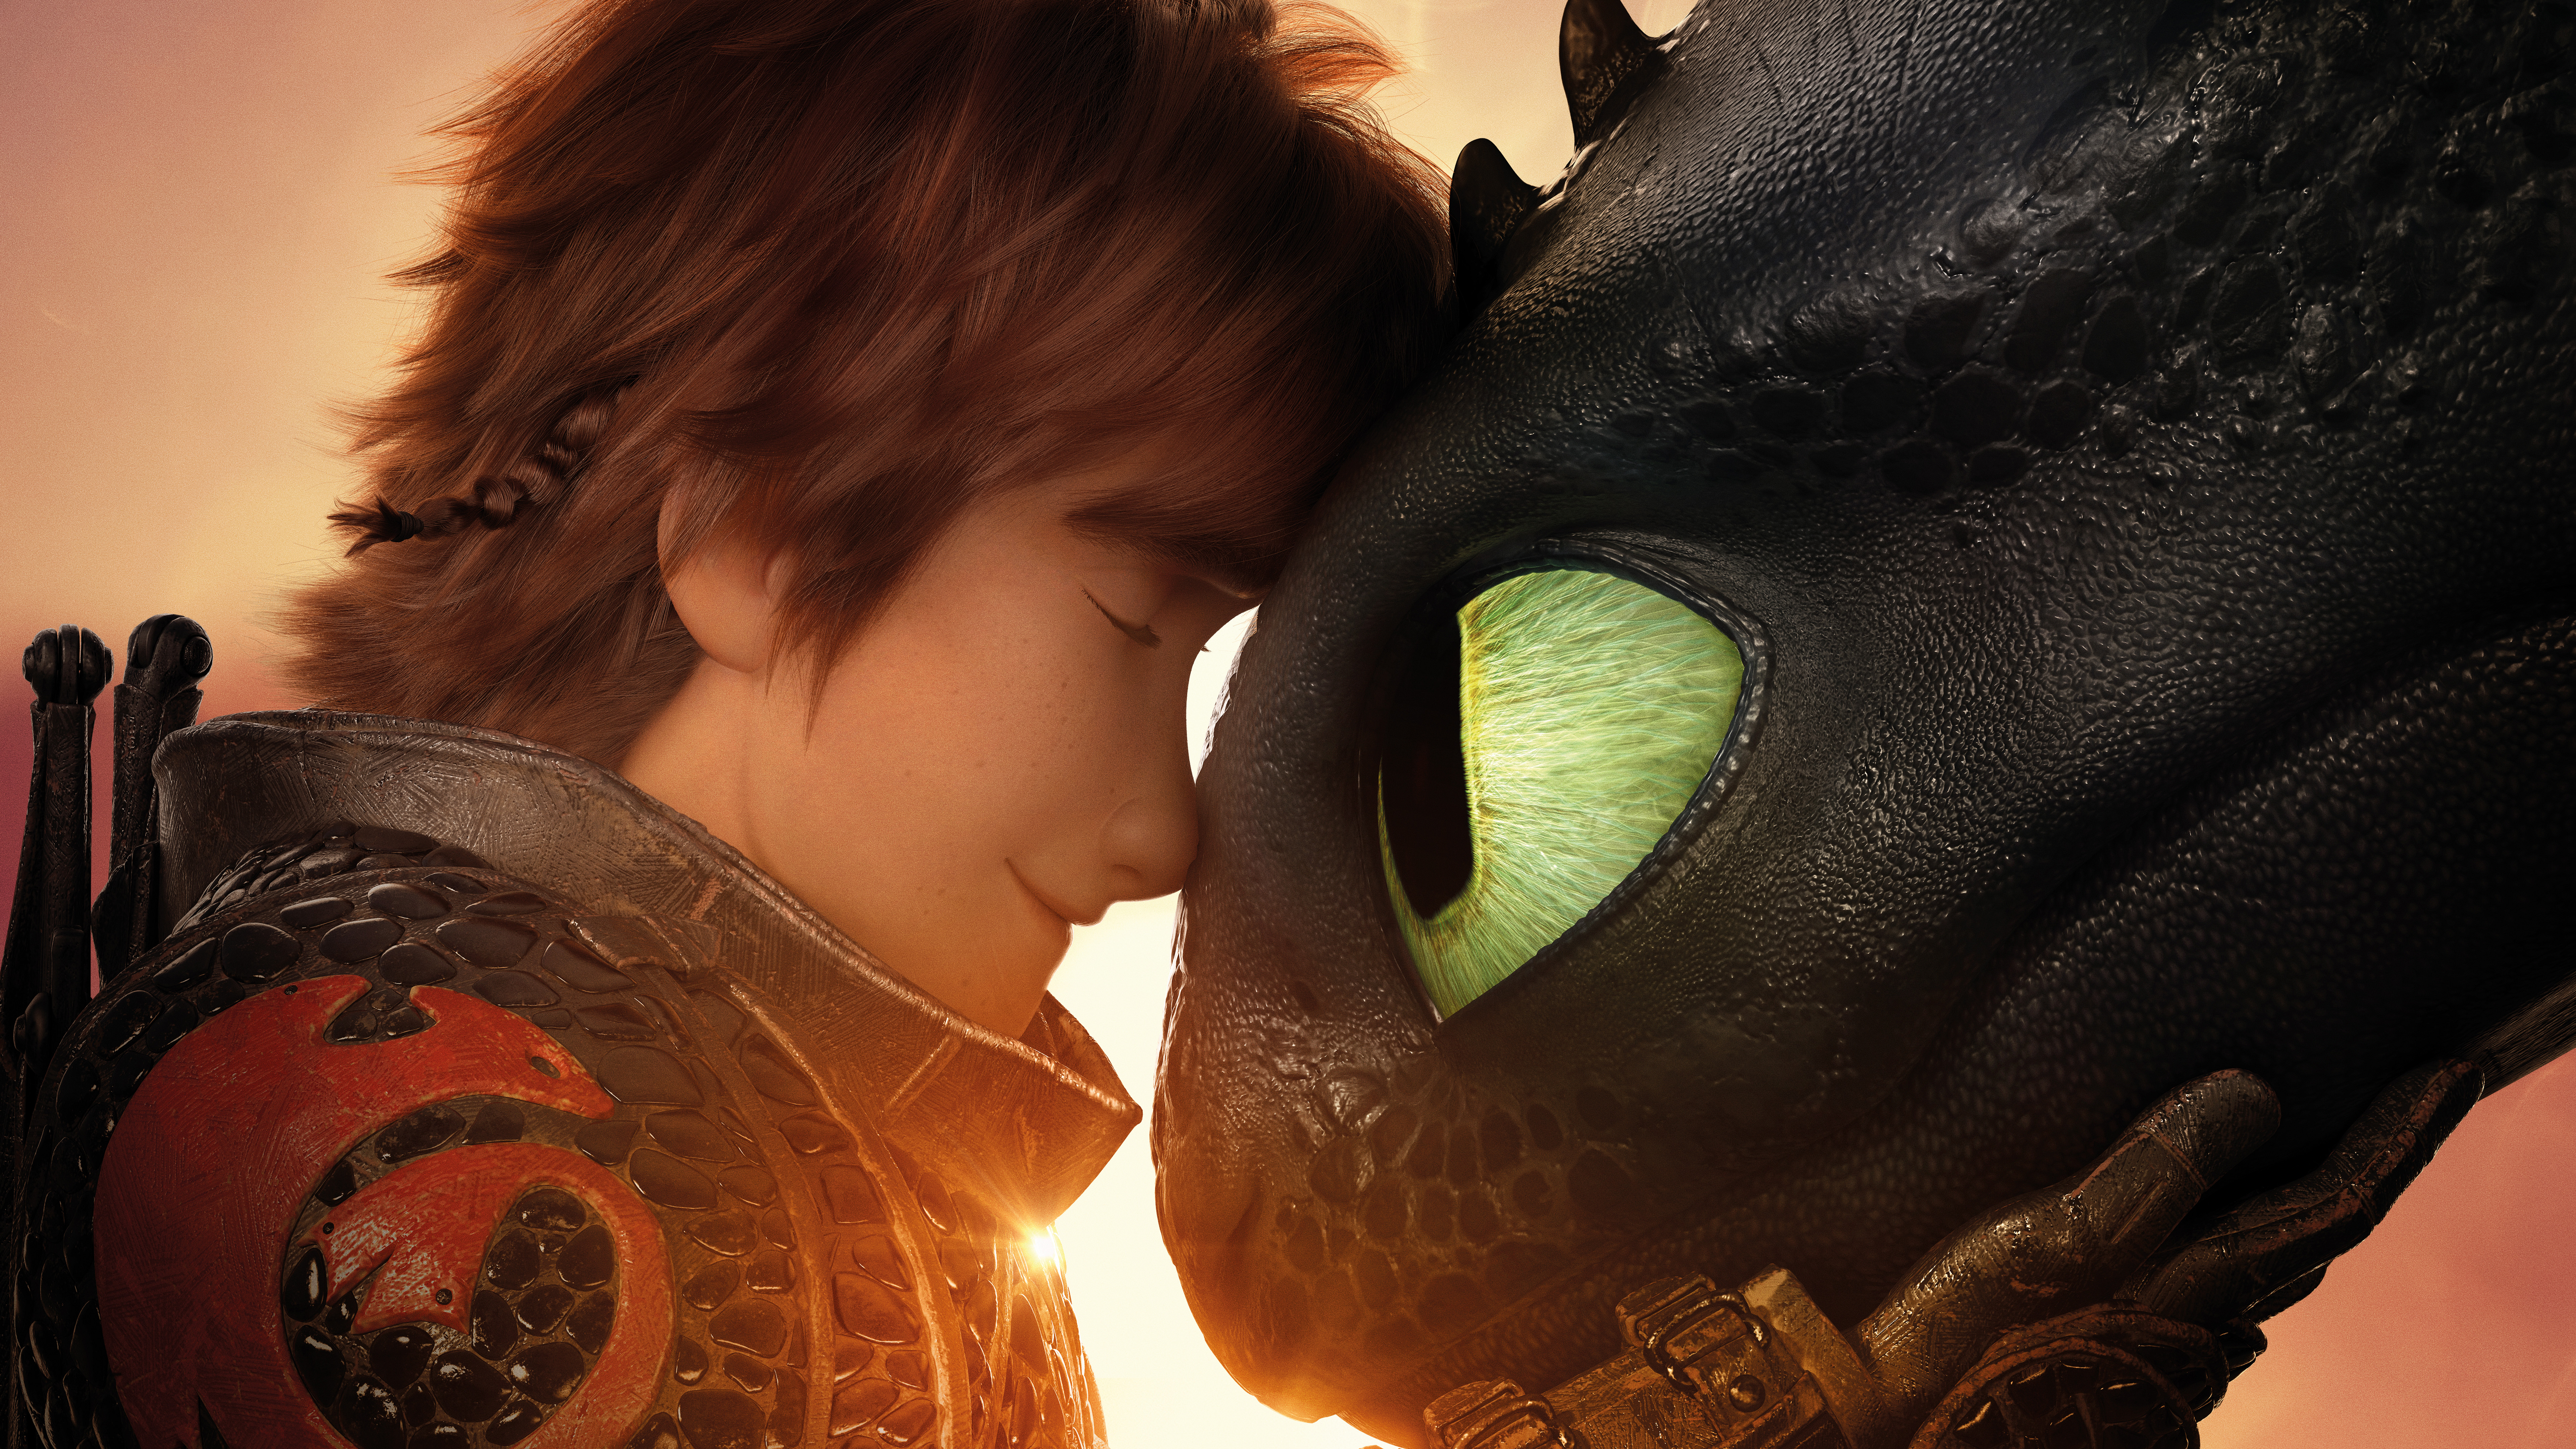 How To Train Your Dragon 3 Hiccup Night Fury 7680x4320